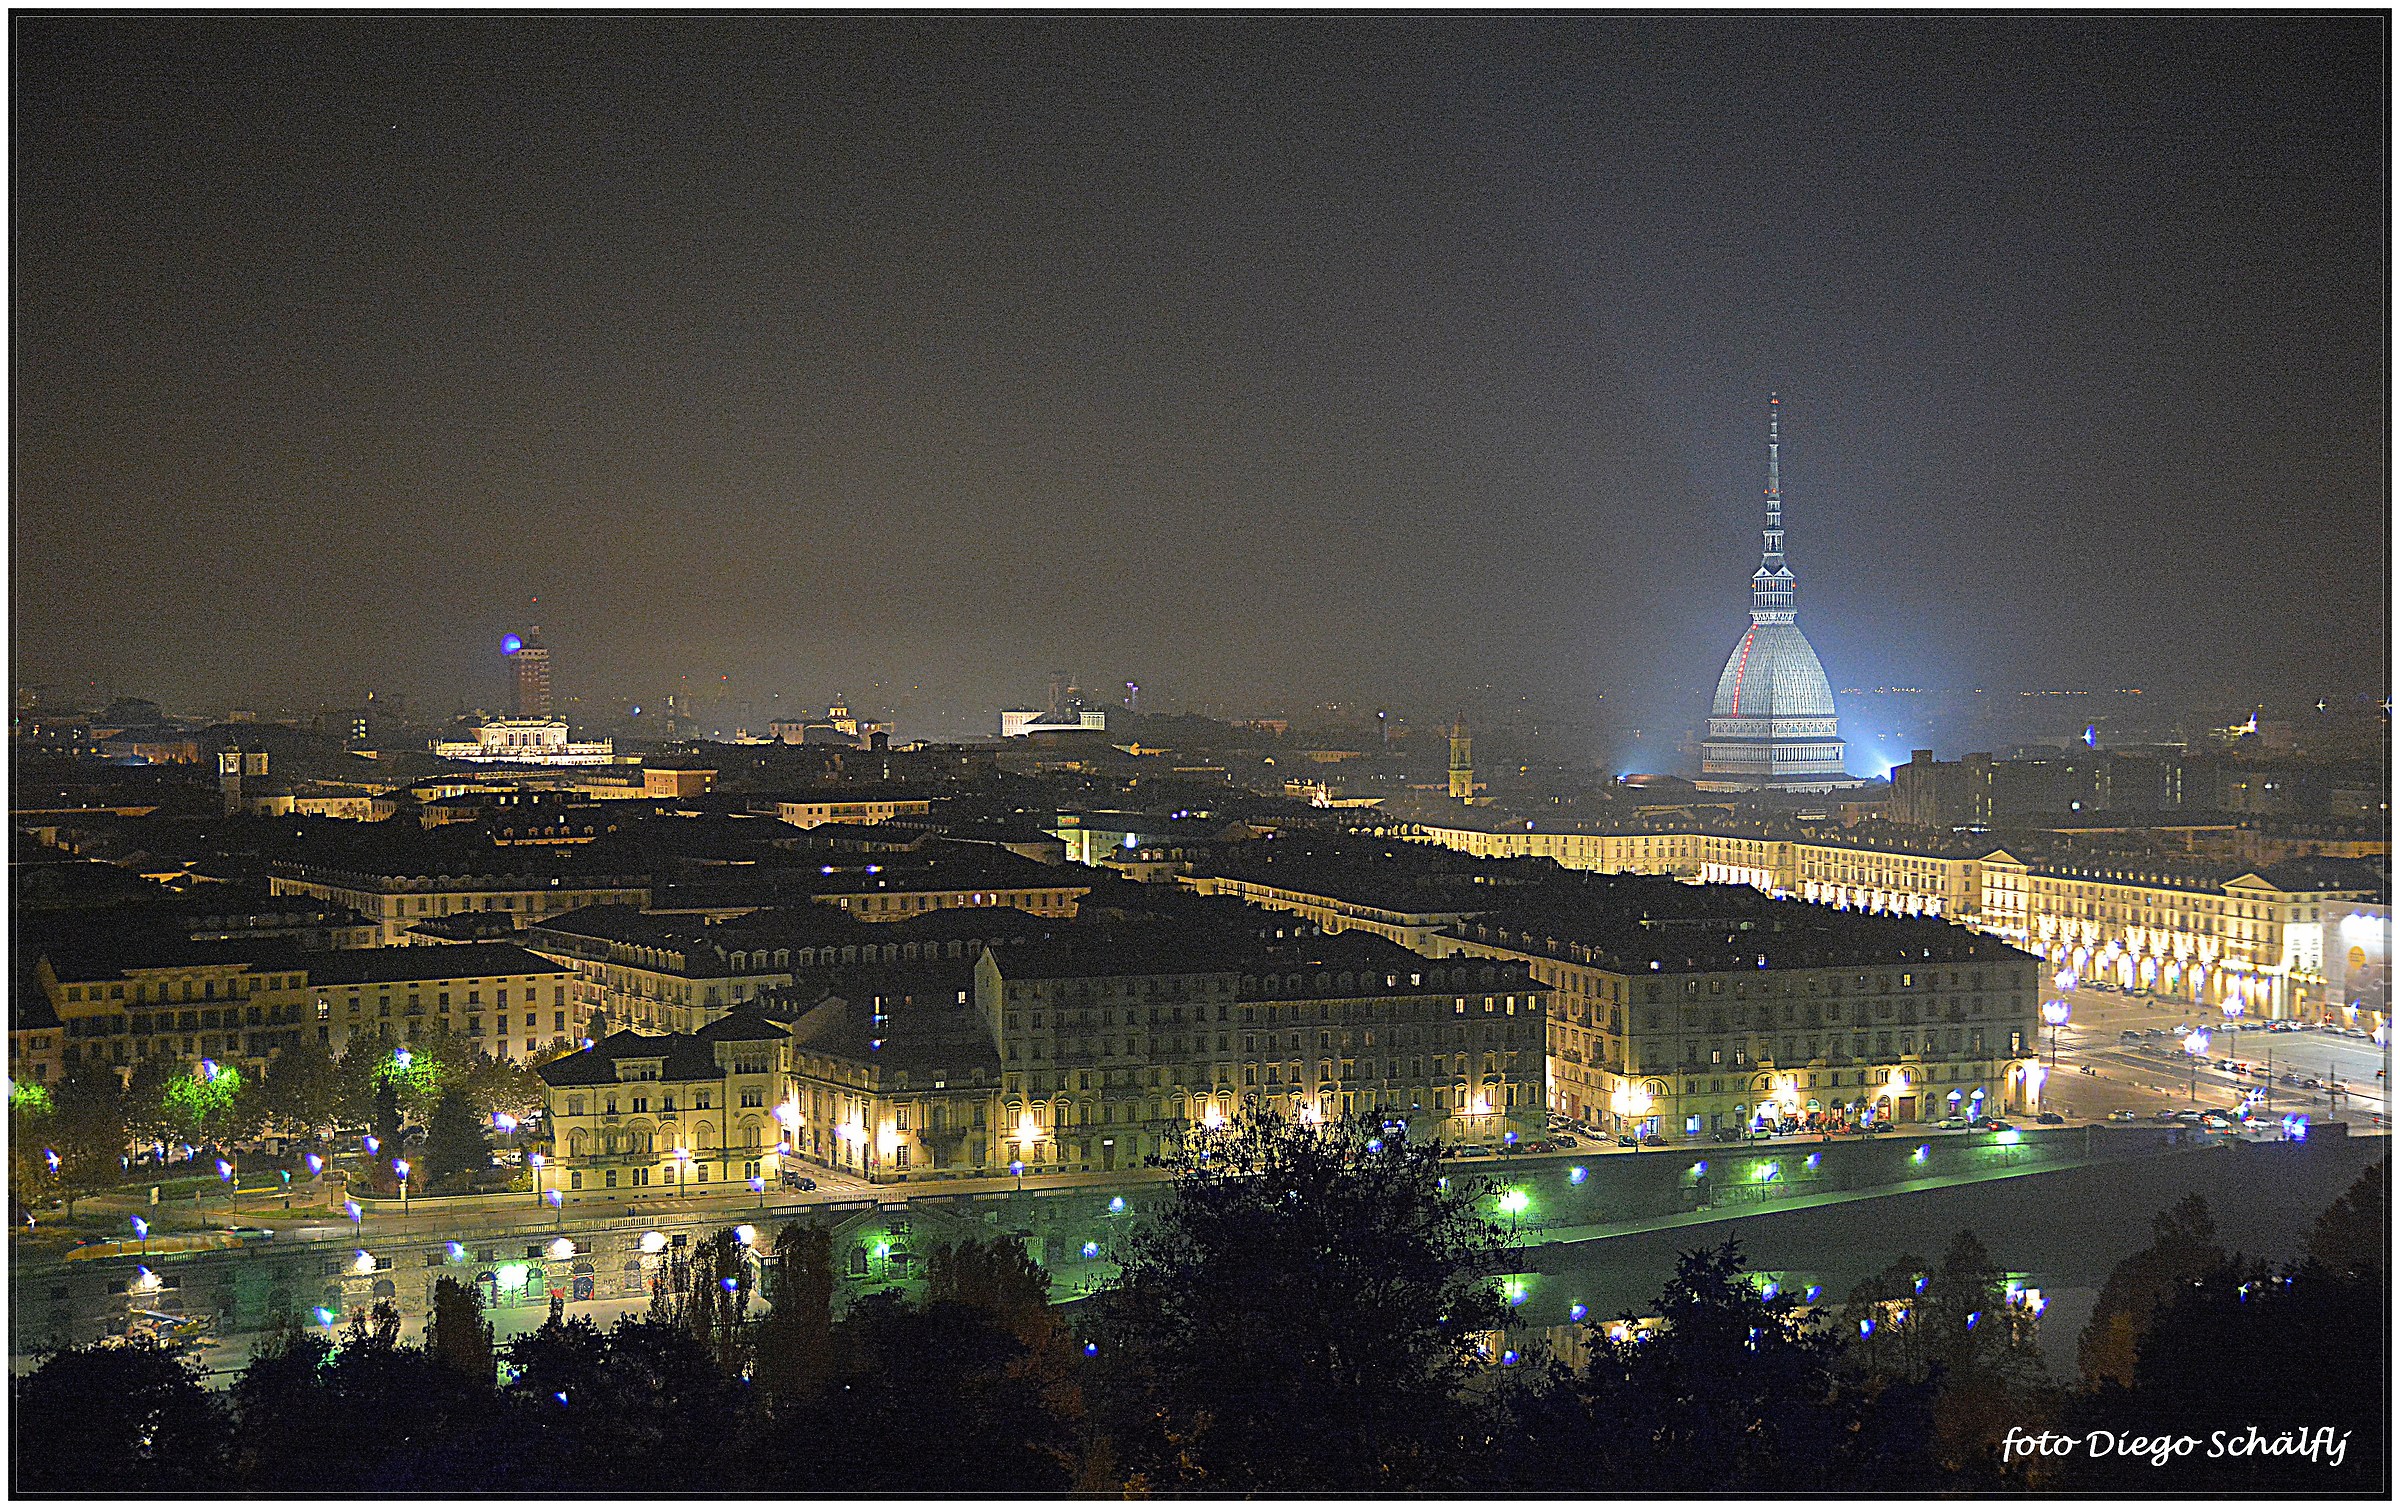 And the evening ... of Turin...